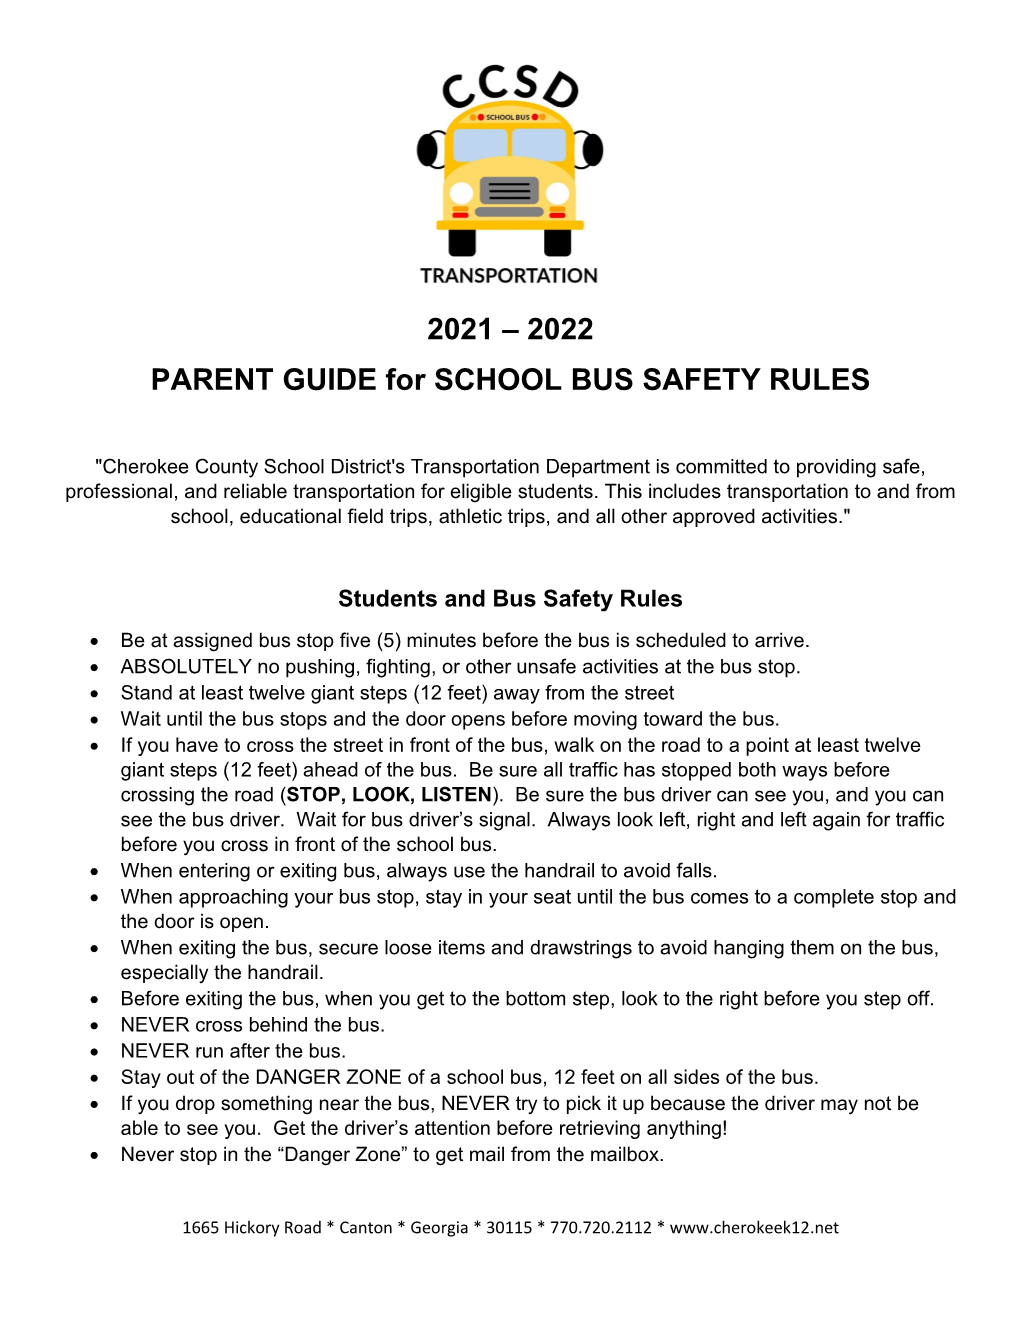 2021 – 2022 PARENT GUIDE for SCHOOL BUS SAFETY RULES